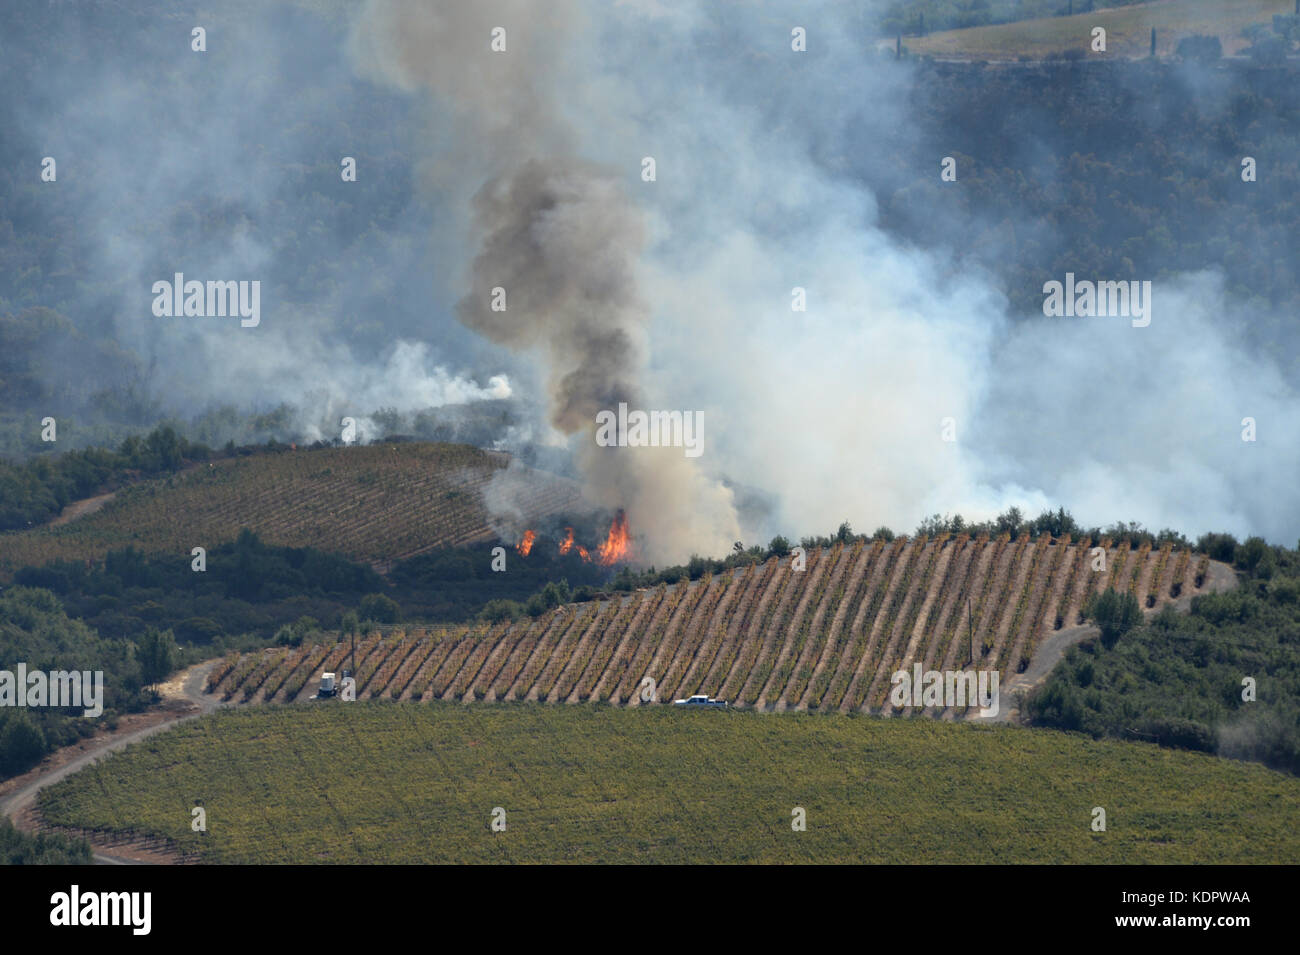 Wild fires burning in the hills and vineyards of Sonoma County October 12, 2017 near Santa Rosa, California. Stock Photo